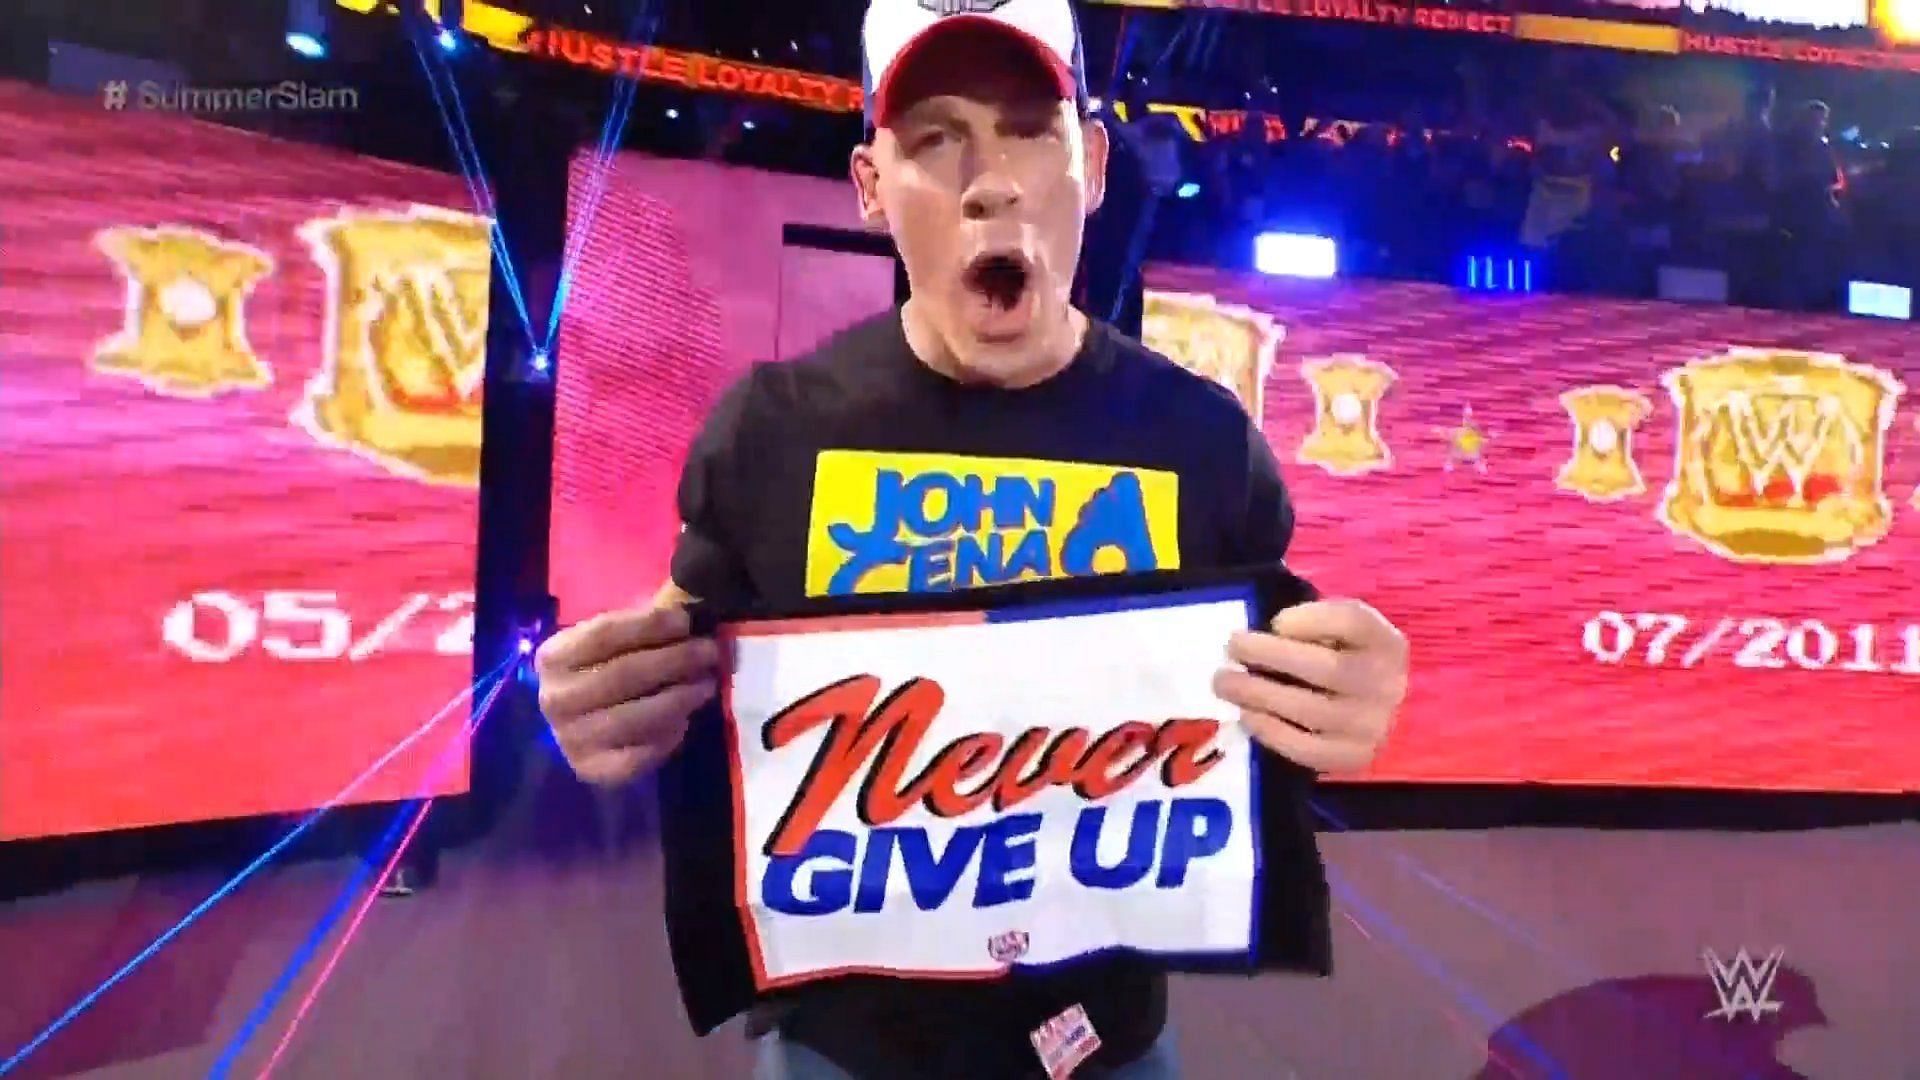 As a big Hollywood star, why does John Cena keep returning to WWE?